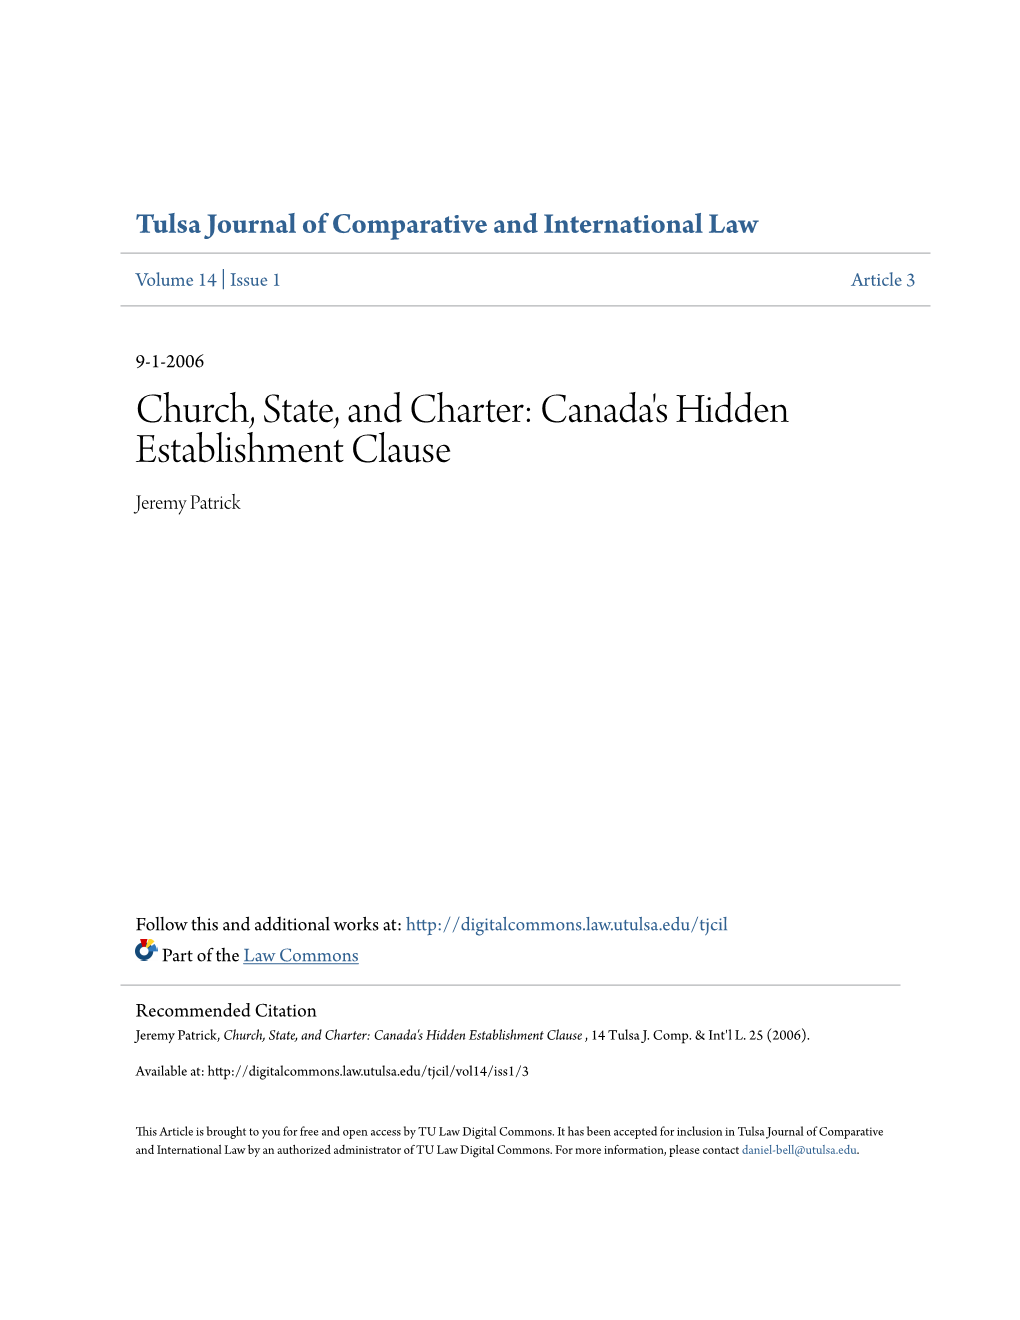 Church, State, and Charter: Canada's Hidden Establishment Clause Jeremy Patrick